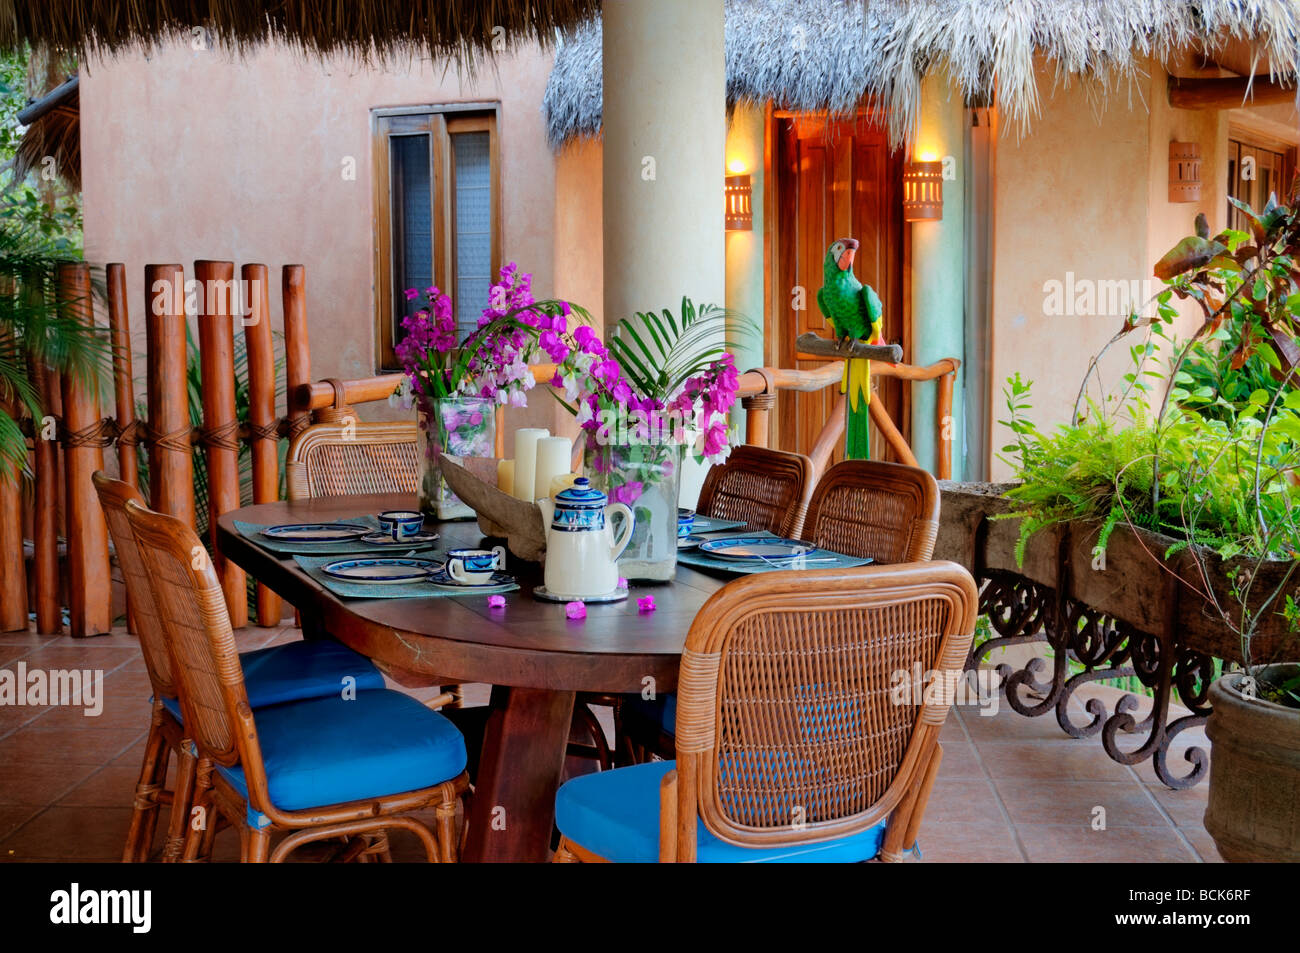 Interior view of dining area under a palapa roof in a tropical home located in Nayarit, Mexico. Stock Photo